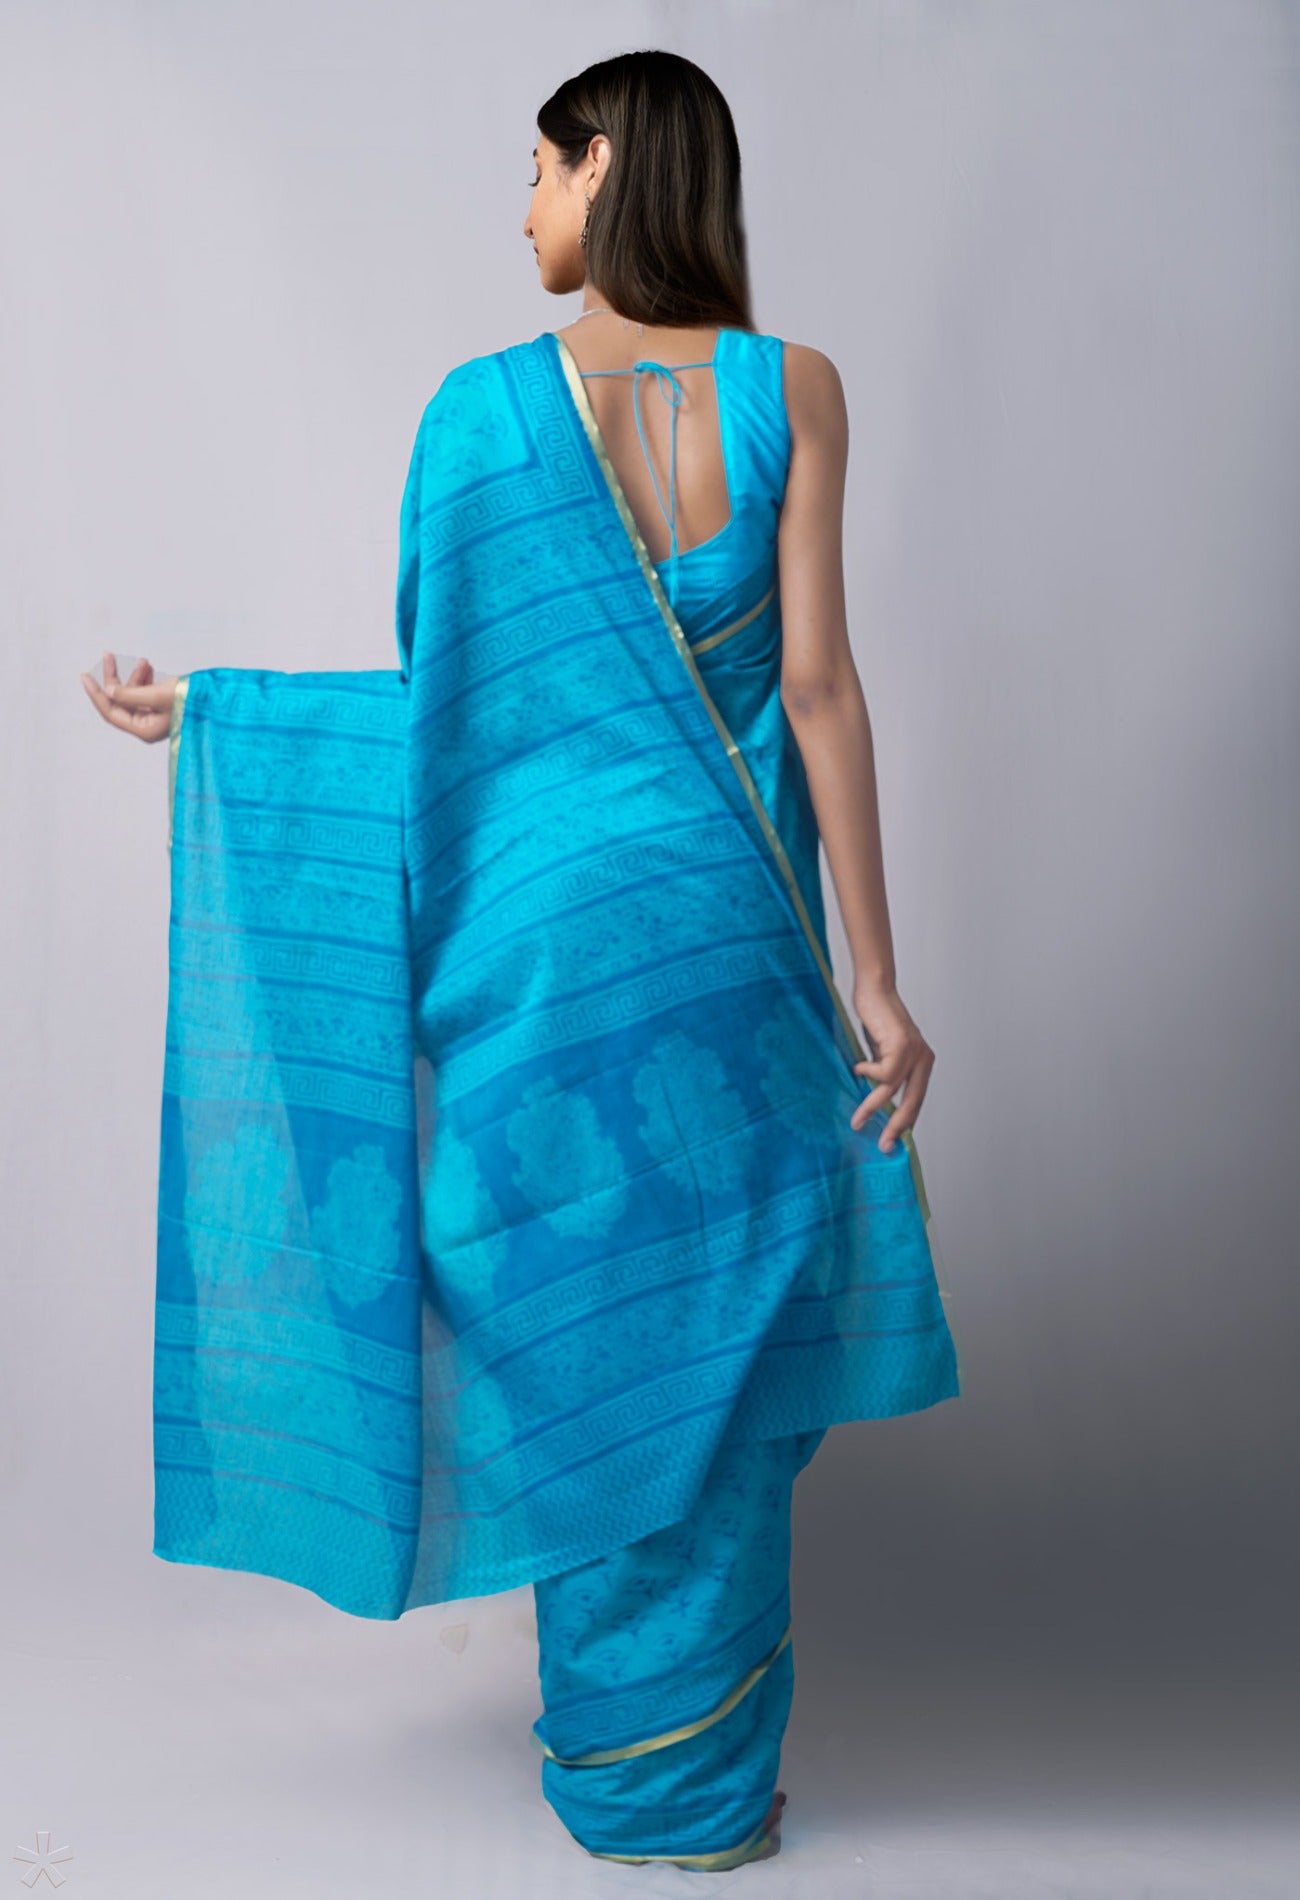 Online Shopping for Blue Pure Bagh venkatagiri Superfine Cotton Saree with Bagh from Andhra Pradesh at Unnatisilks.com India
